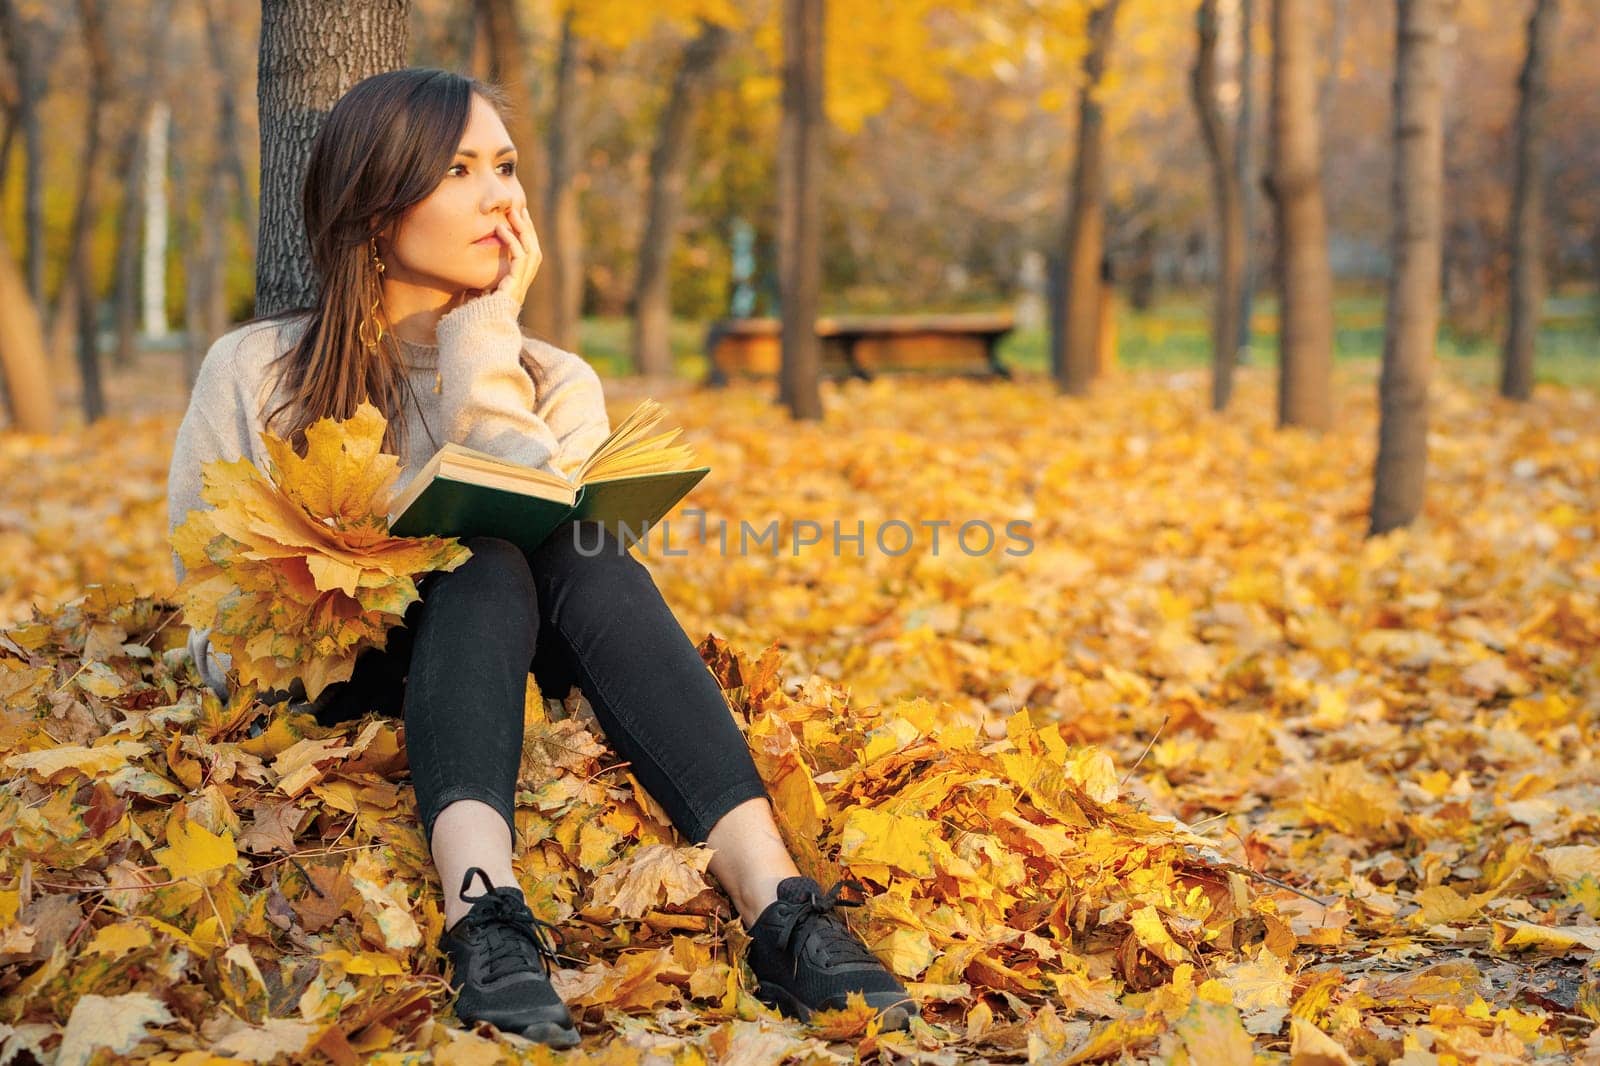 A young woman sits with a book in her hands on autumn foliage near a tree and dreams about something.